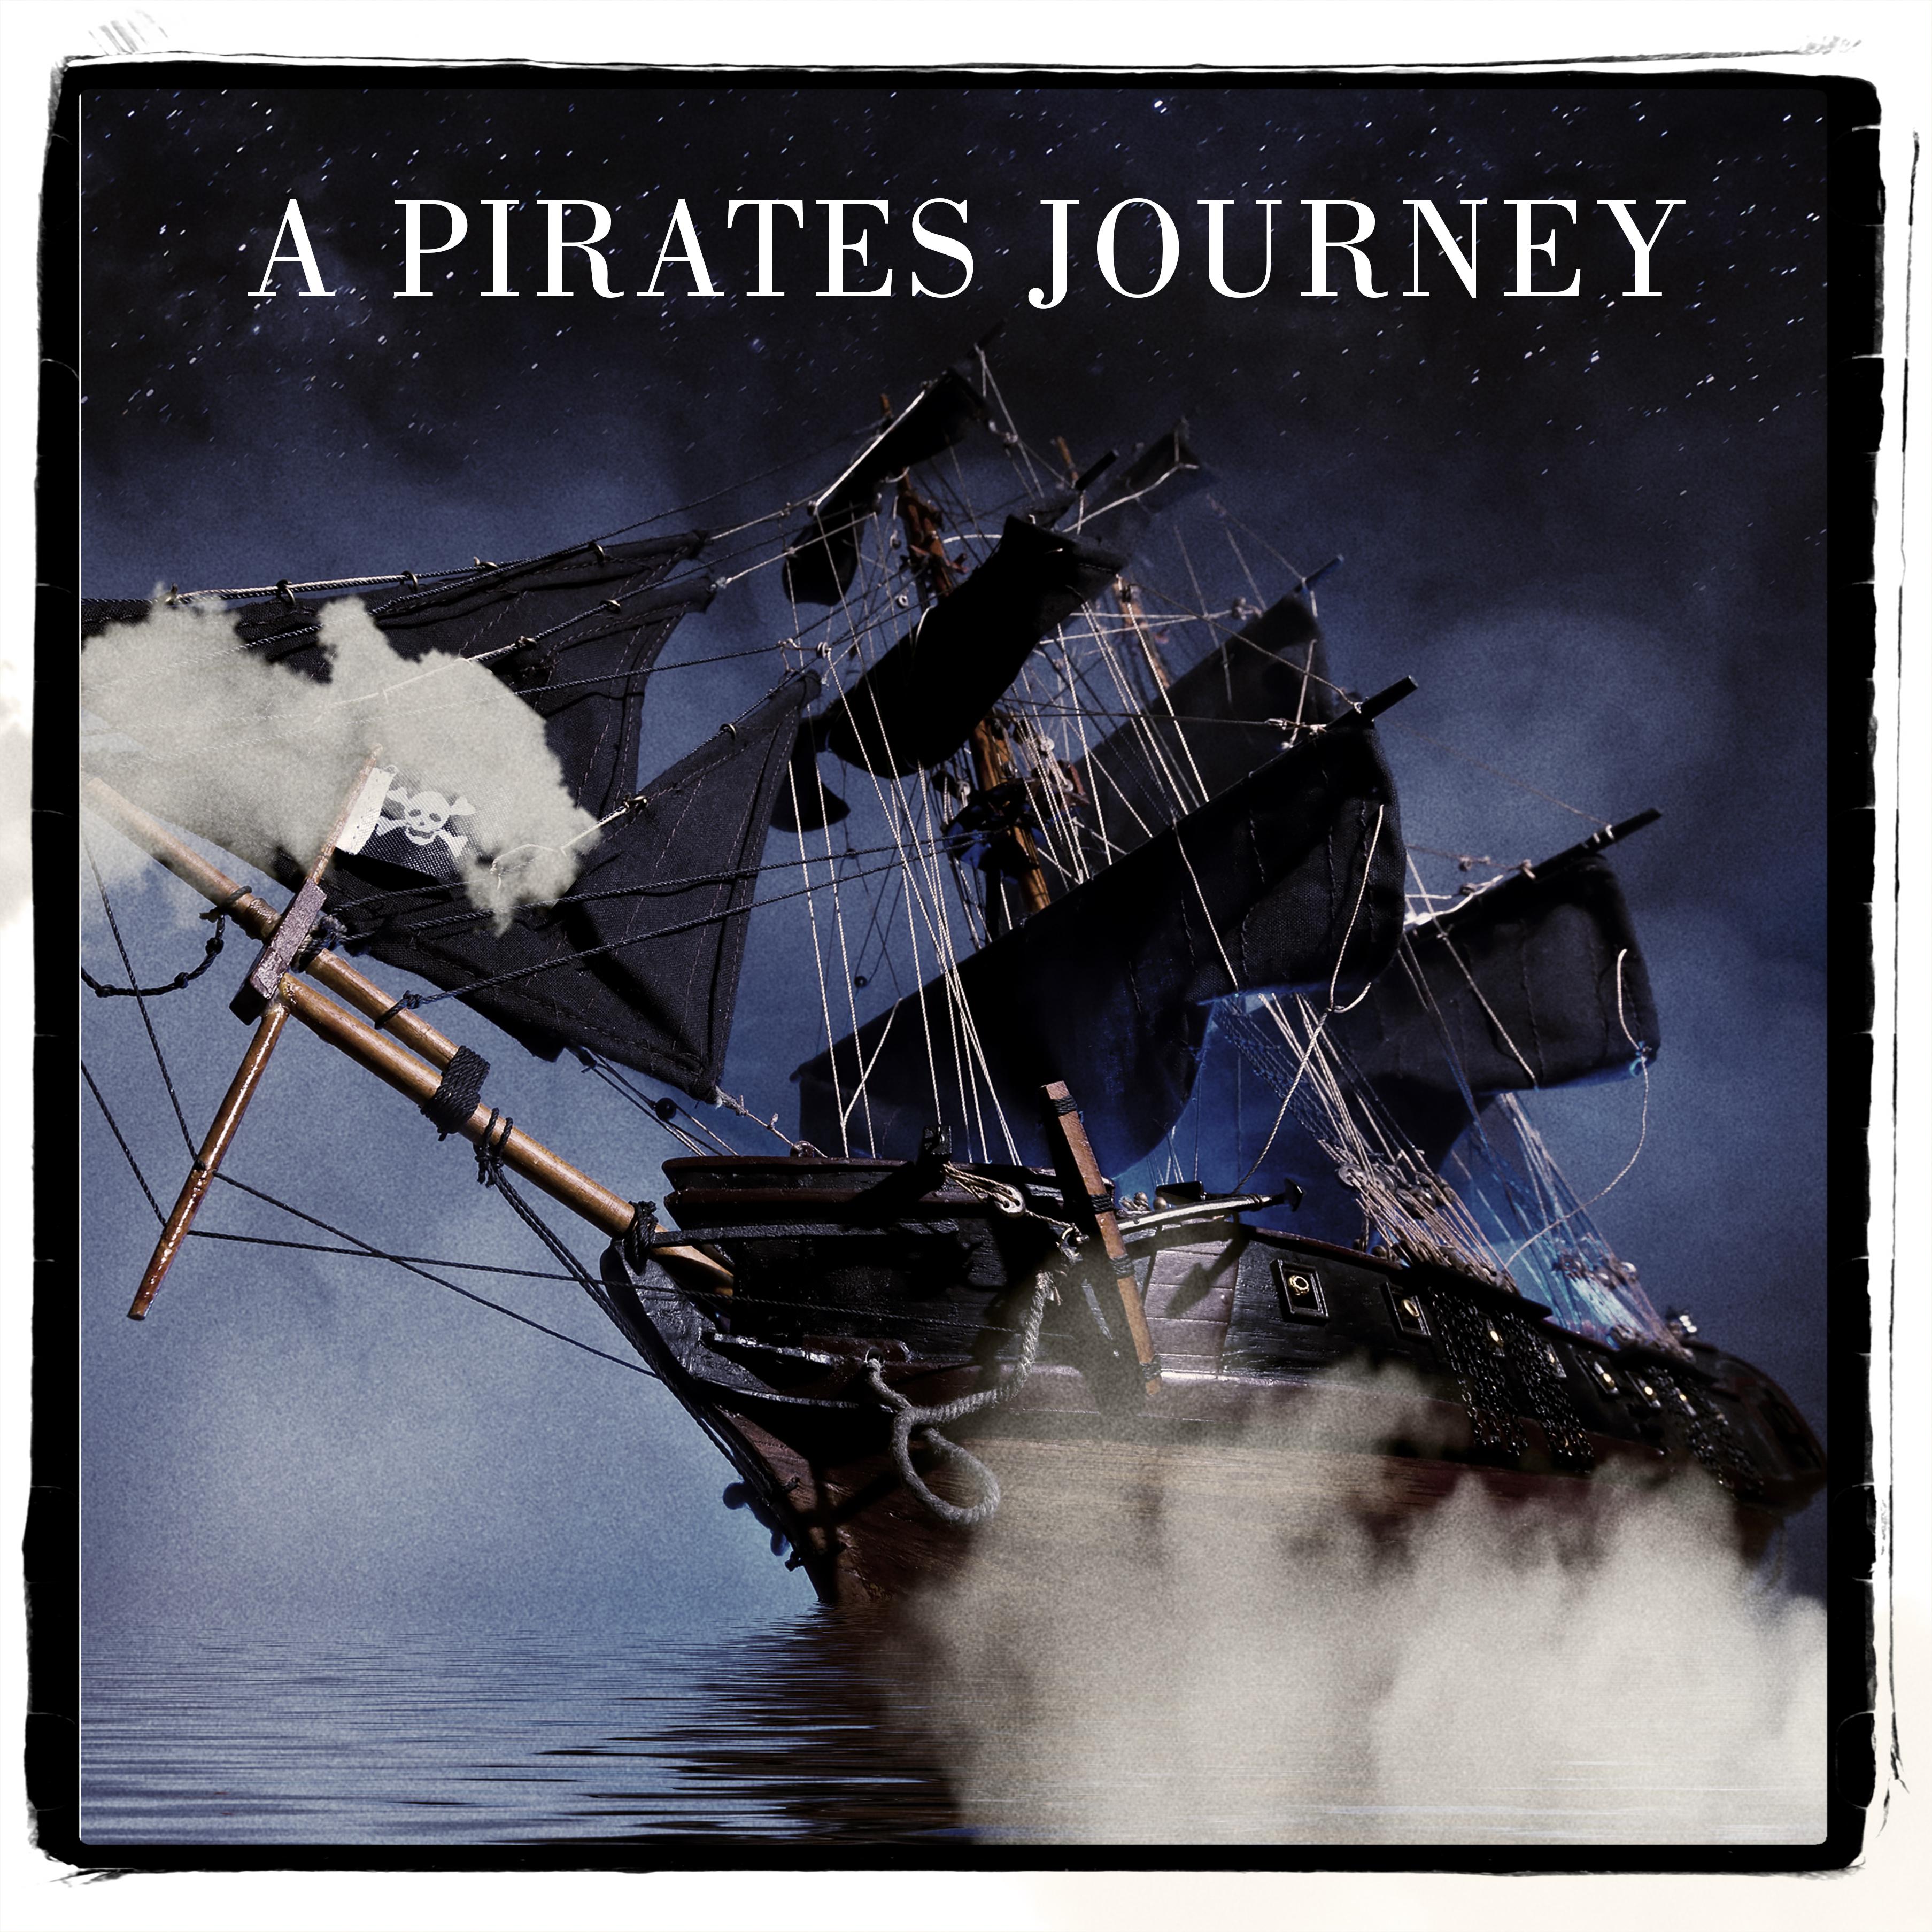 A Pirate's Journey